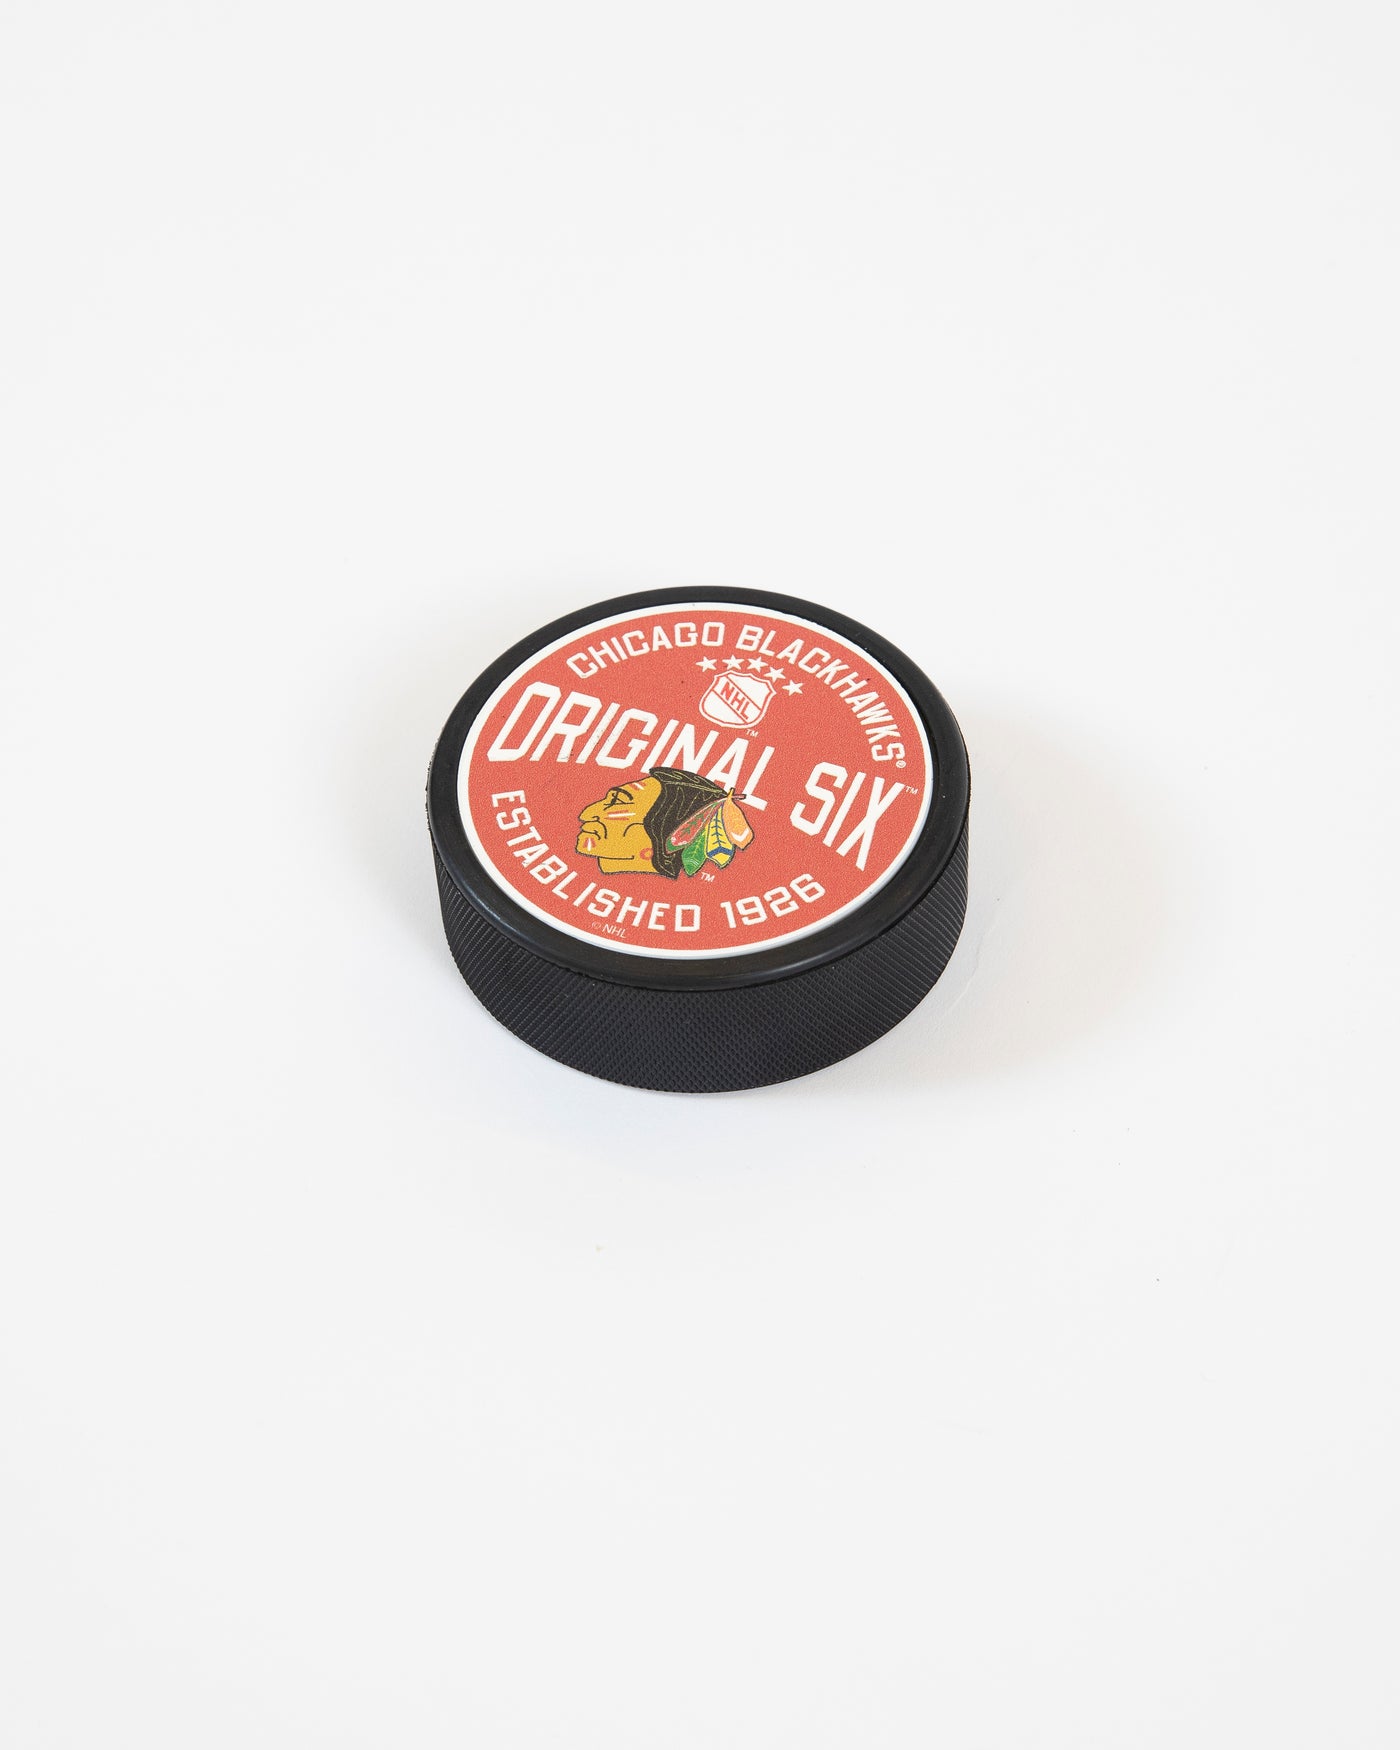 Mustang Original Six wordmark with primary logo on red background puck - lay flat